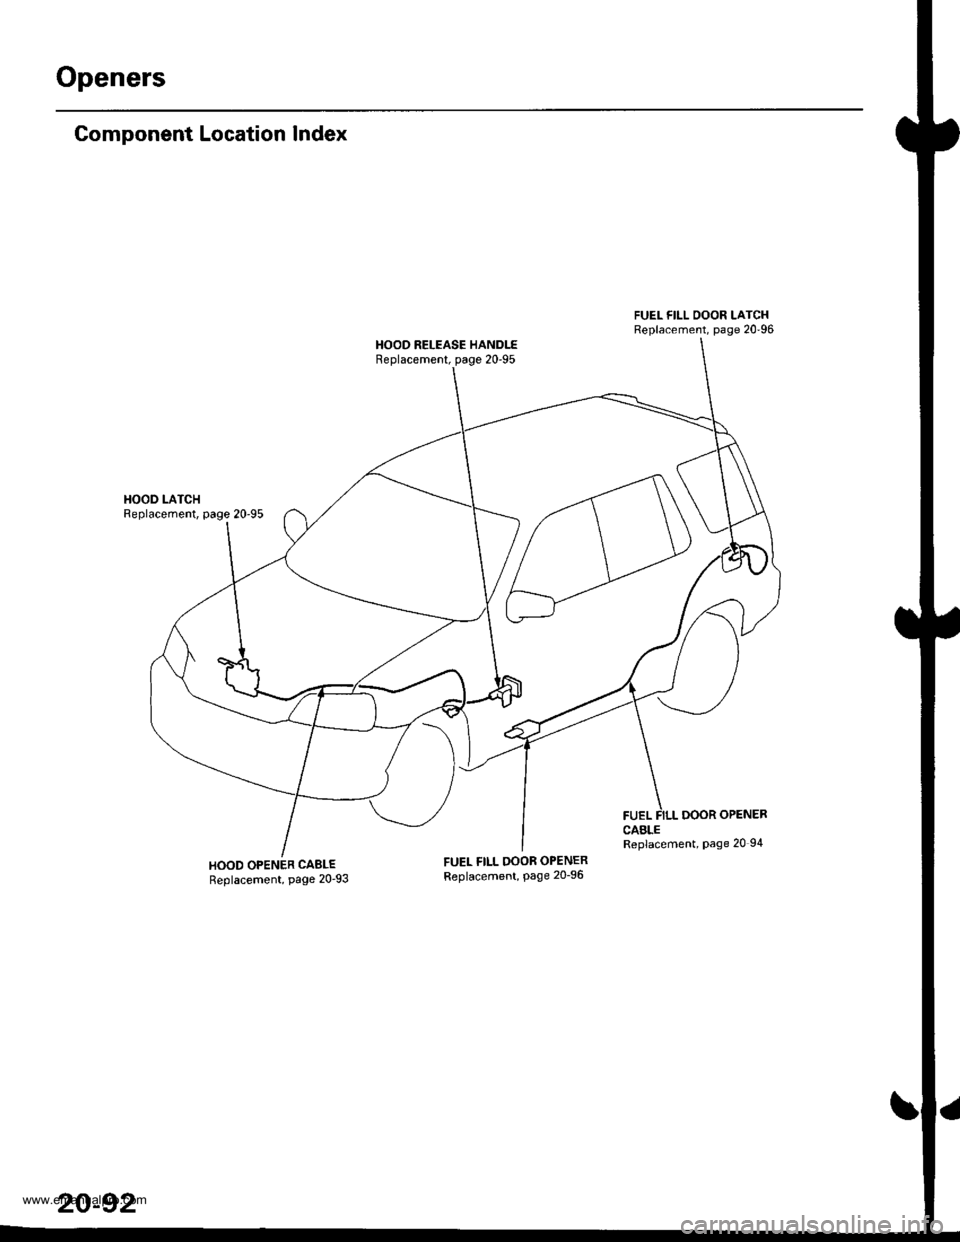 HONDA CR-V 2000 RD1-RD3 / 1.G Workshop Manual 
Openers
Component Location Index
HOOD LATCHReplacement, page 2095
HOOD OPENER CABLEReplacement, page 2093
FUEL FILL OOOR LATCHReplacement, page 2096
HOOD RELEASE HANDLEReplacement, page 2095
FUEL